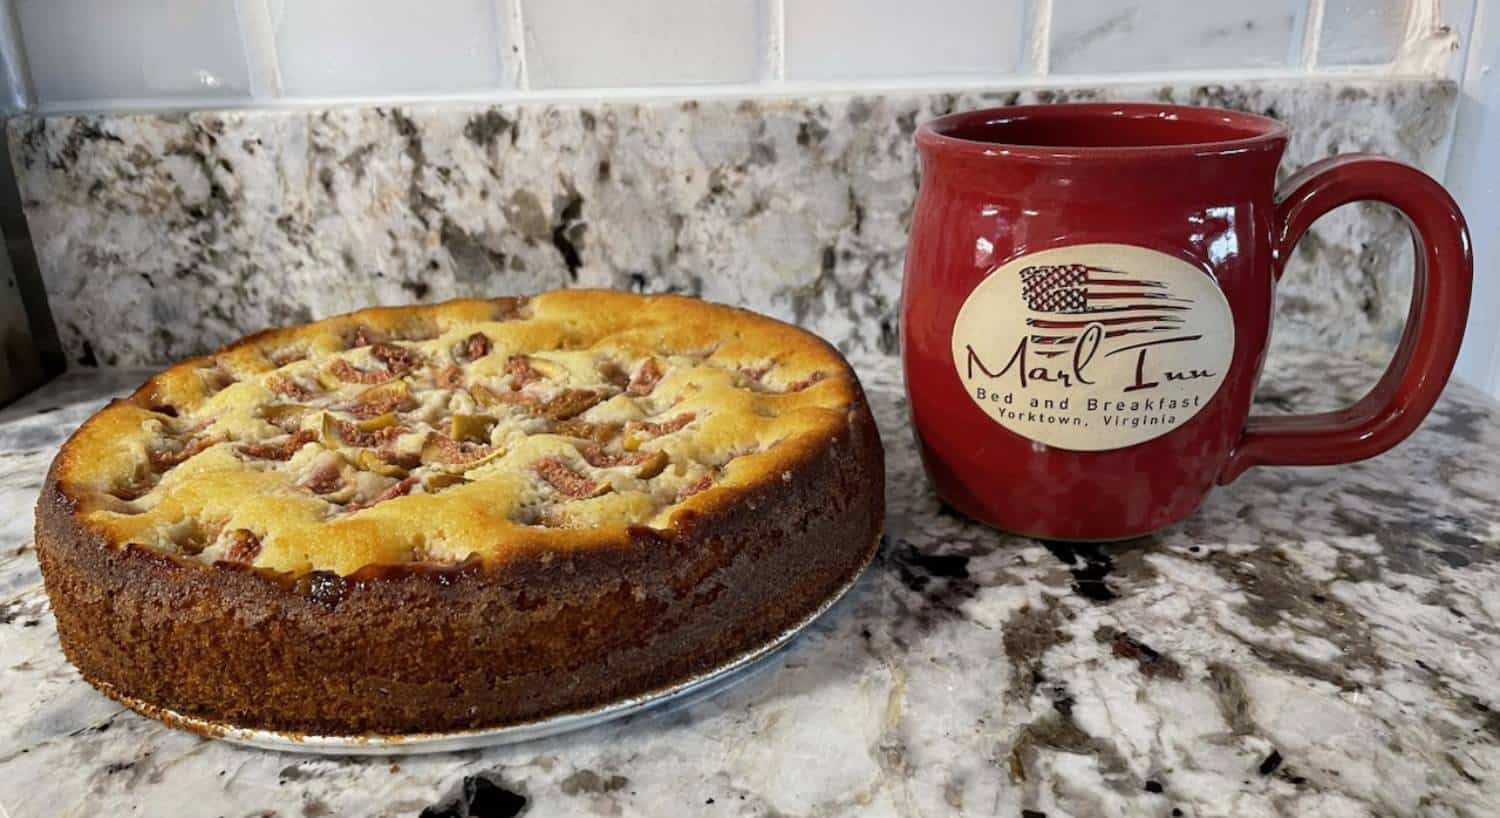 Close up view of a homemade coffee cake and red stoneware cup with Marl Inn logo on it